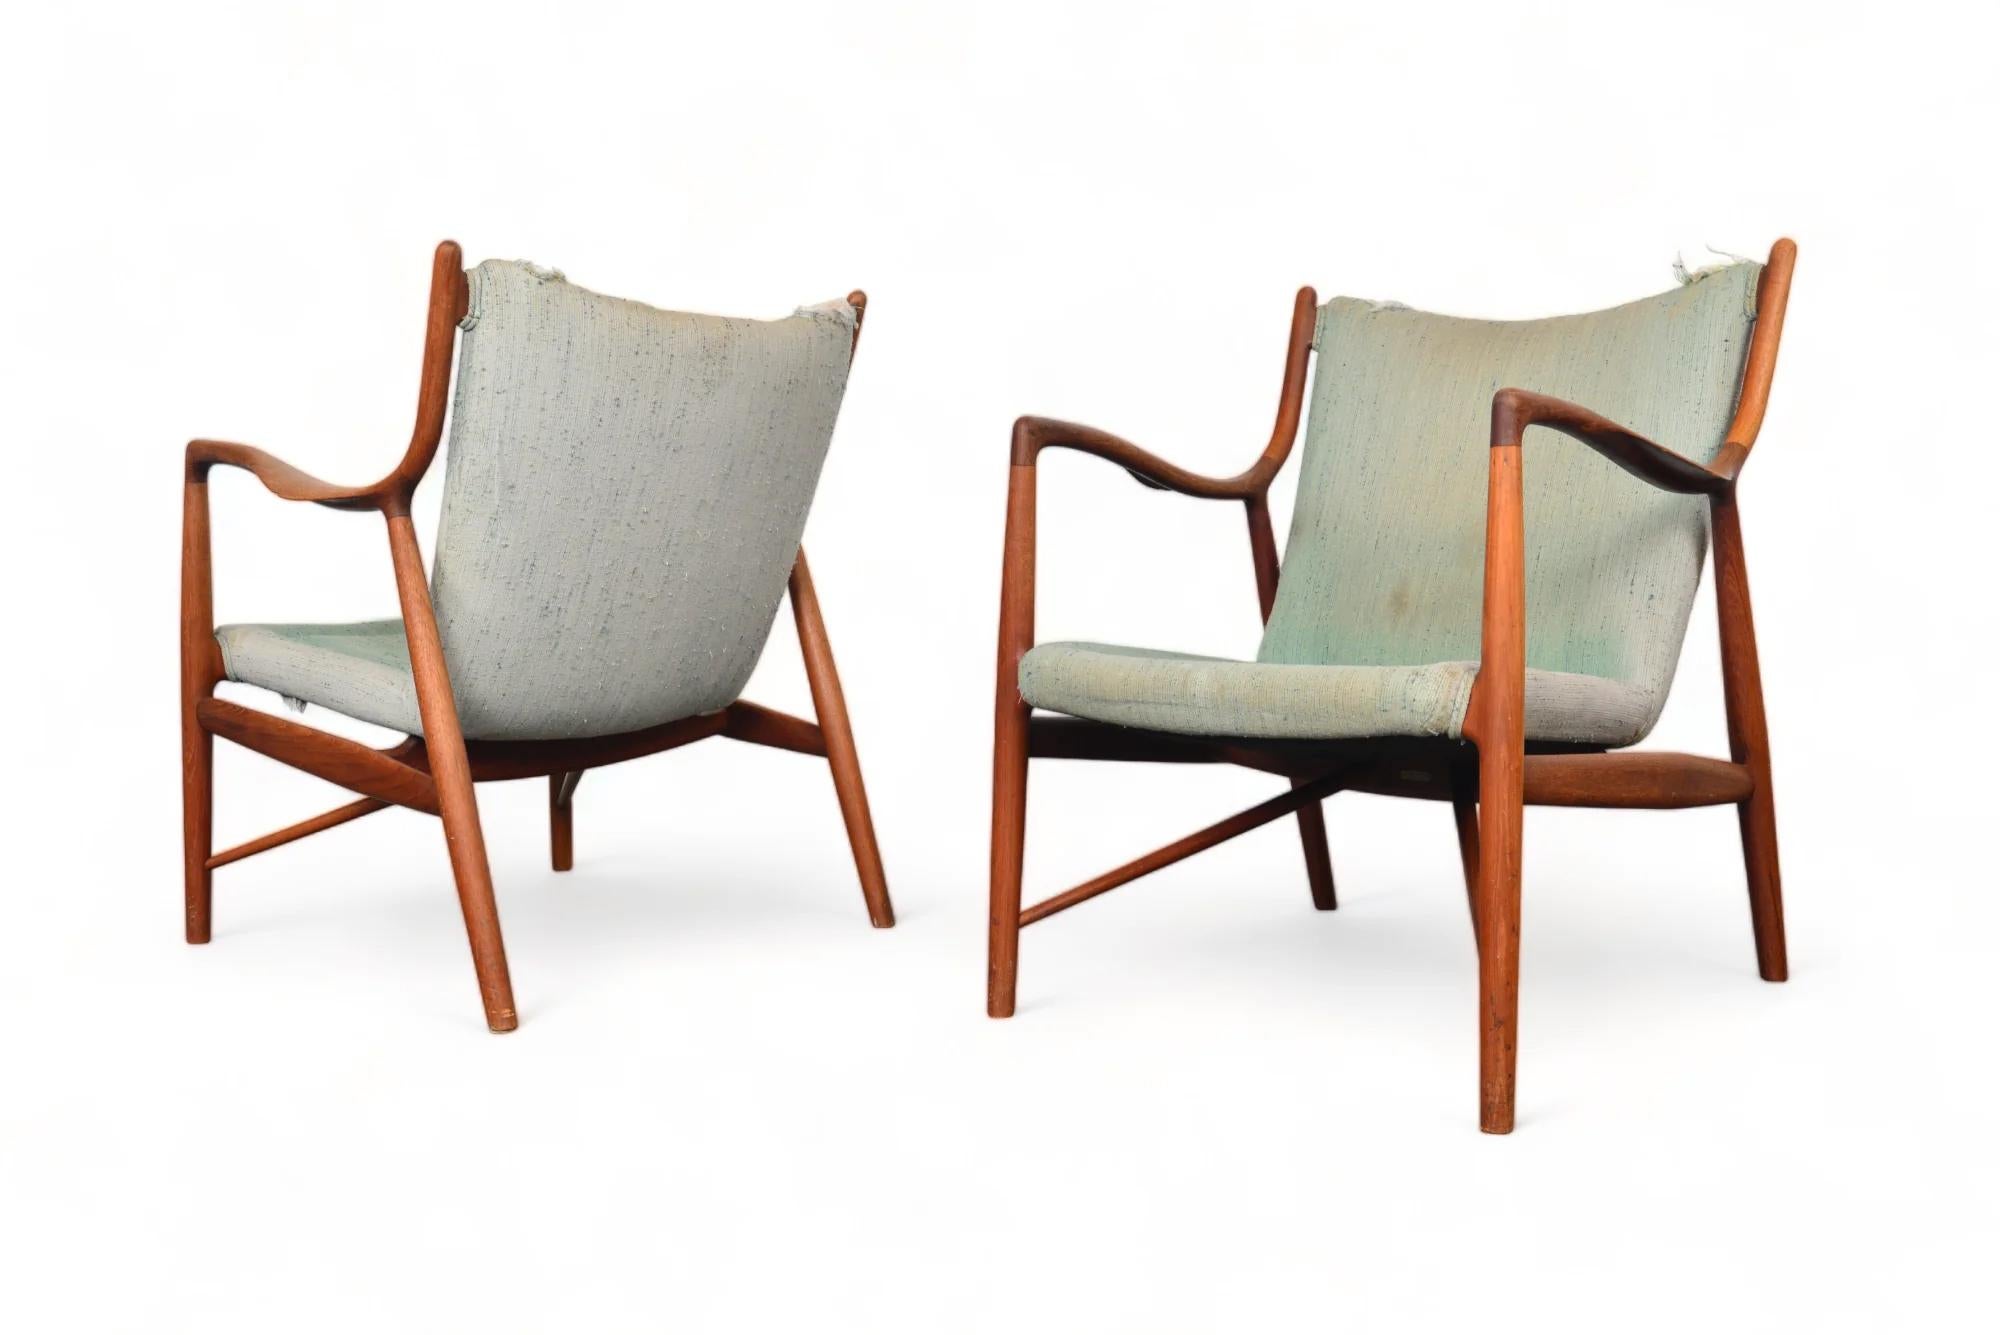 Rare Pair Of Finn Juhl Nv45 Lounge Chairs In Teak In Good Condition For Sale In Berkeley, CA